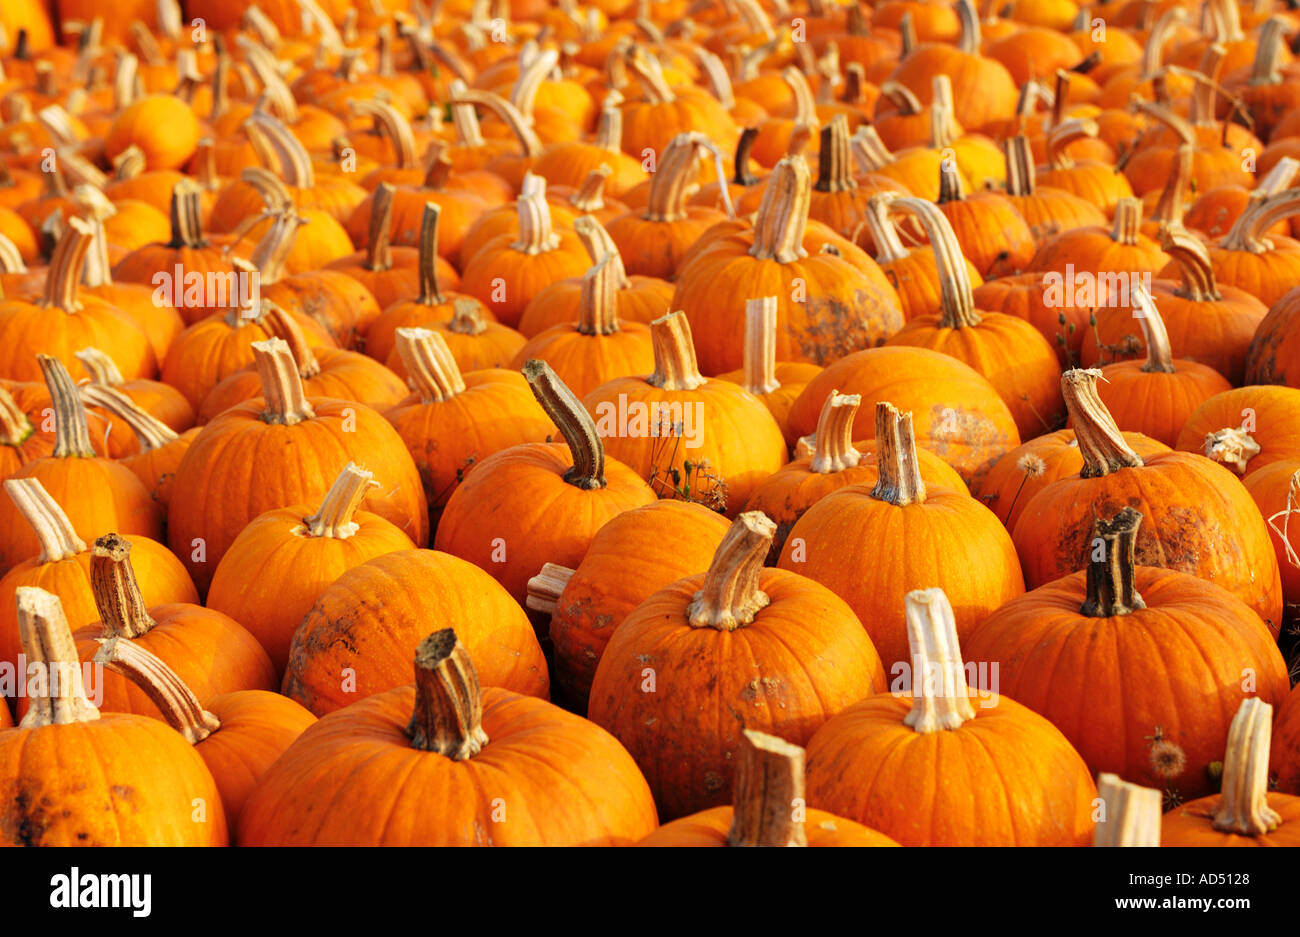 background of fall pumpkins Stock Photo